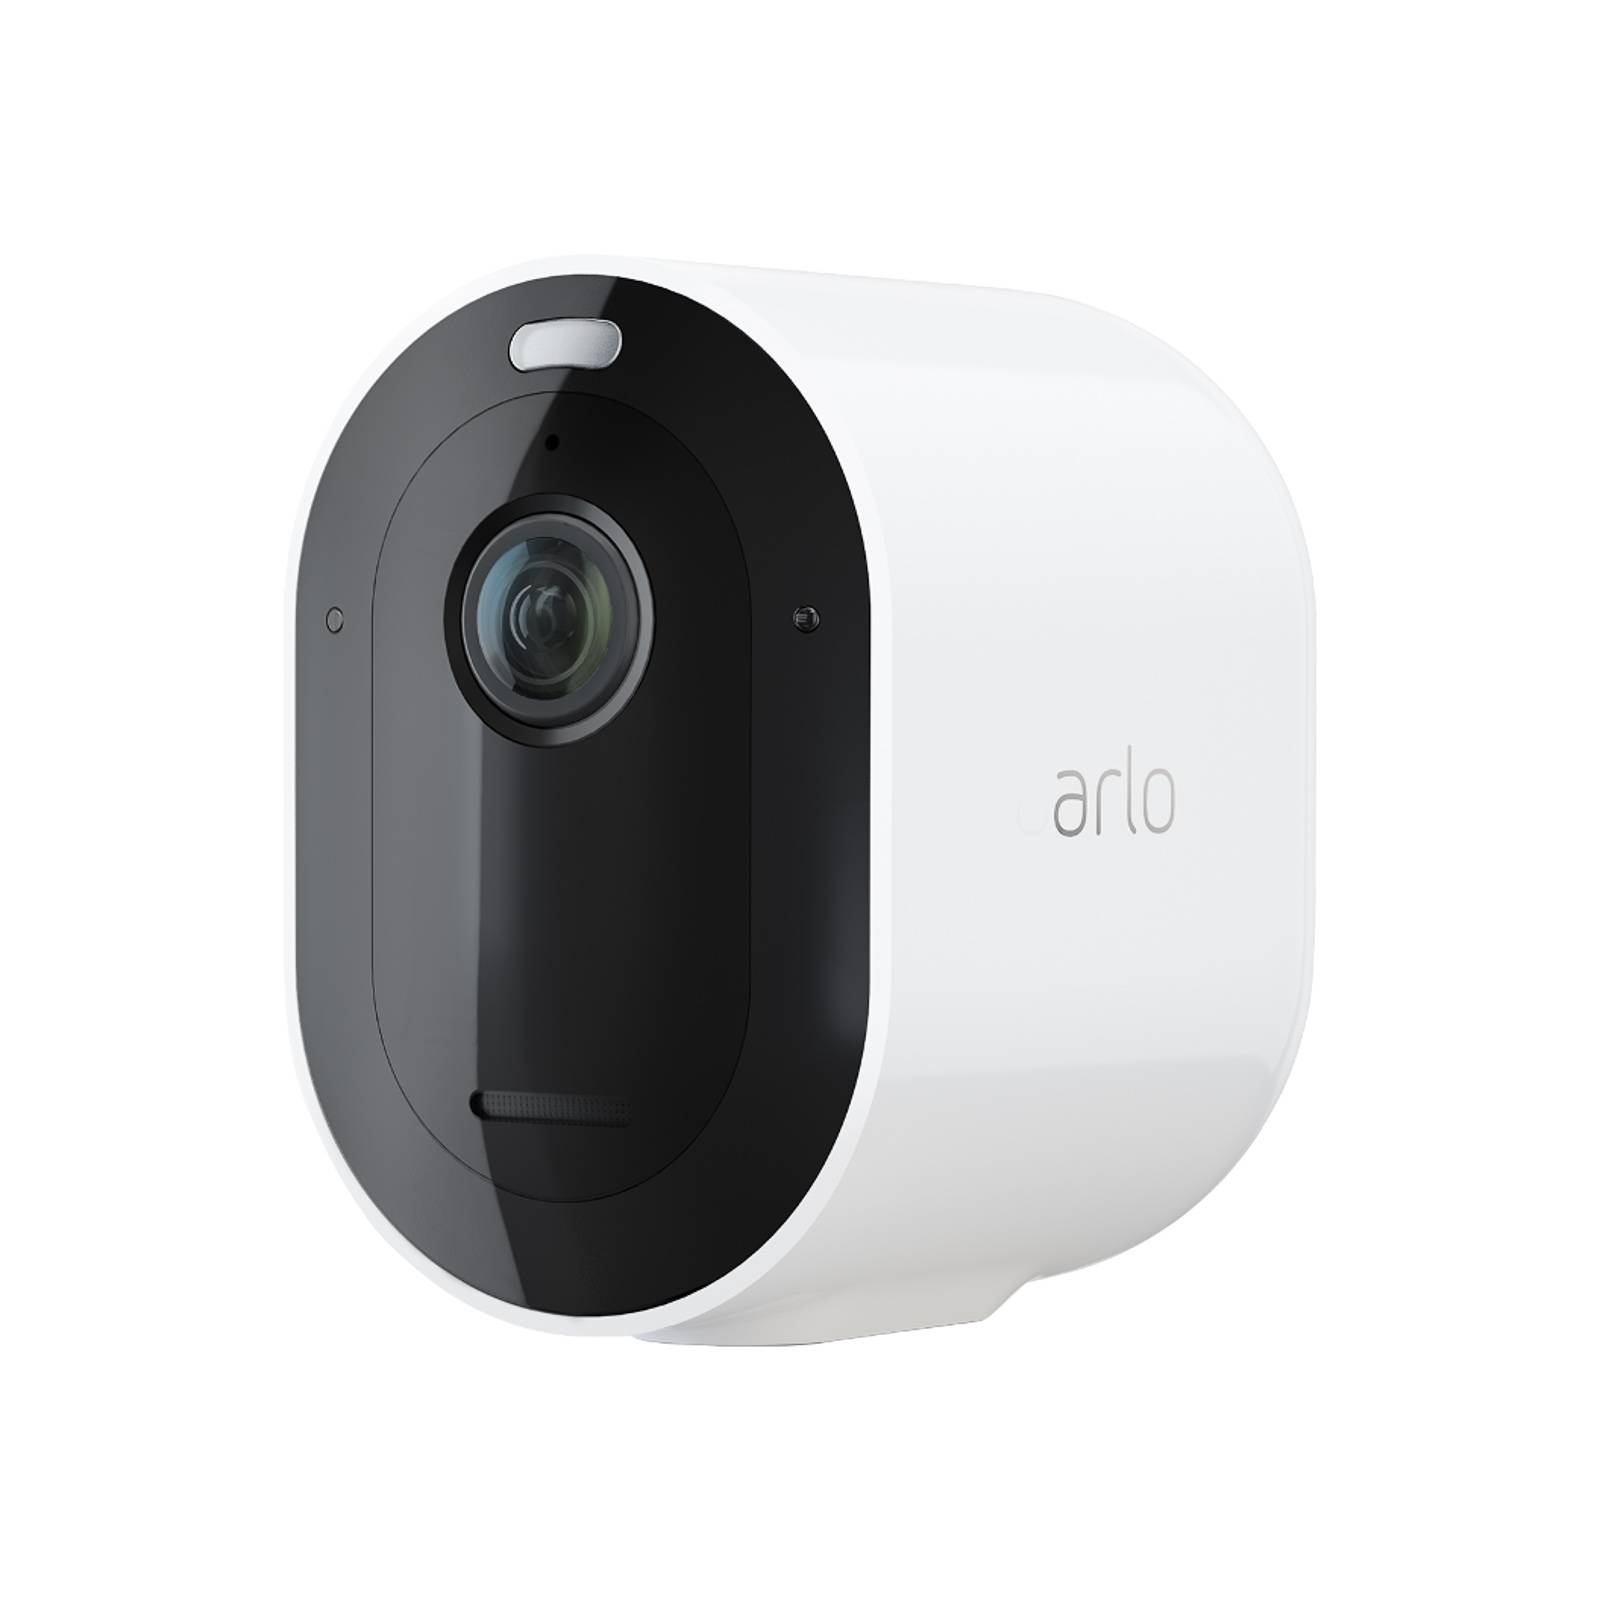 Image of Arlo Pro 3 caméra supplémentaire, blanche 